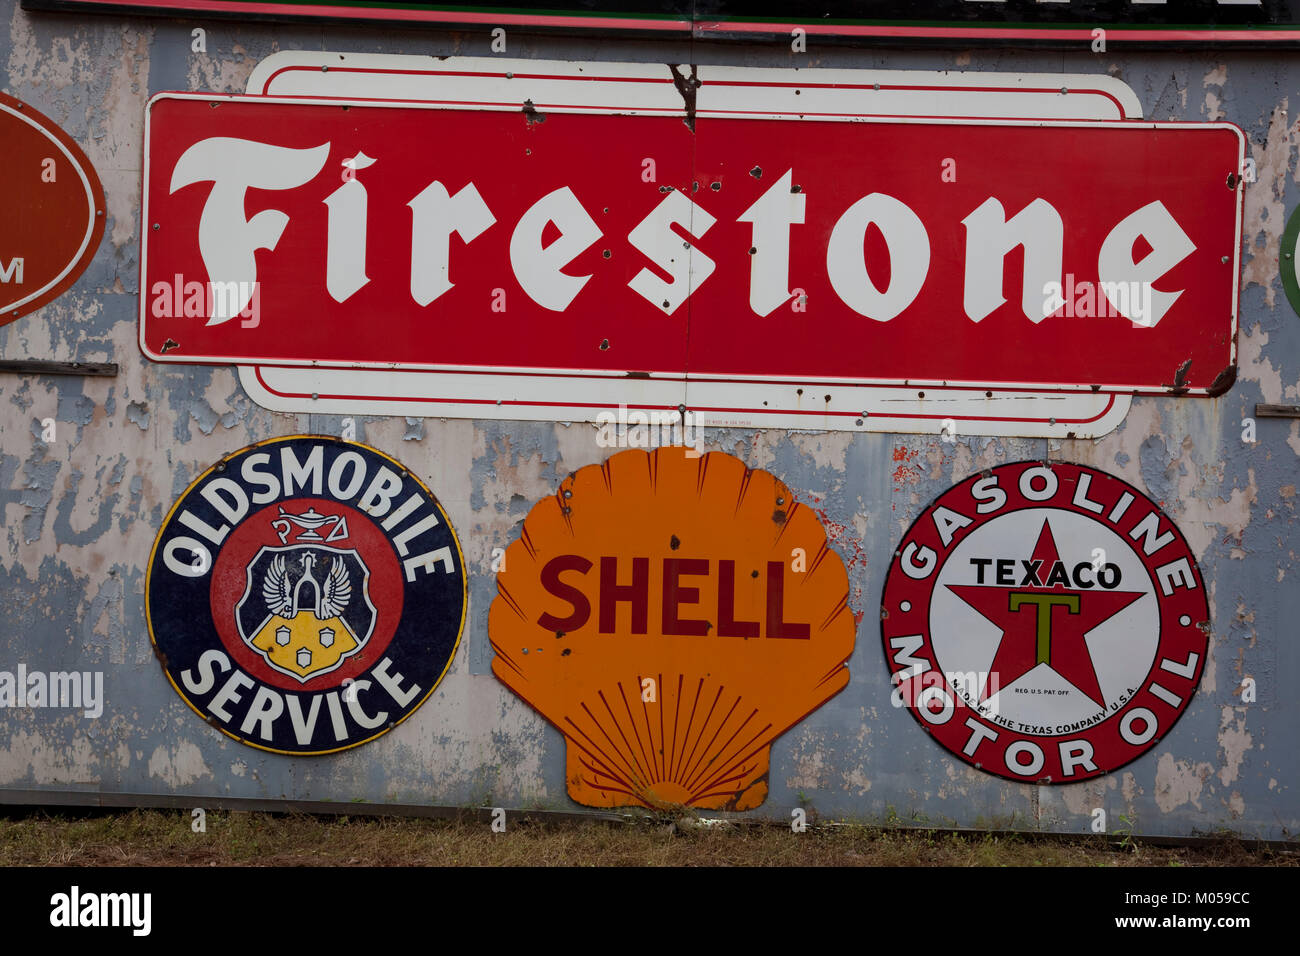 Firestone, Shell, Texaco and Oldsmobile Service Signs Stock Photo